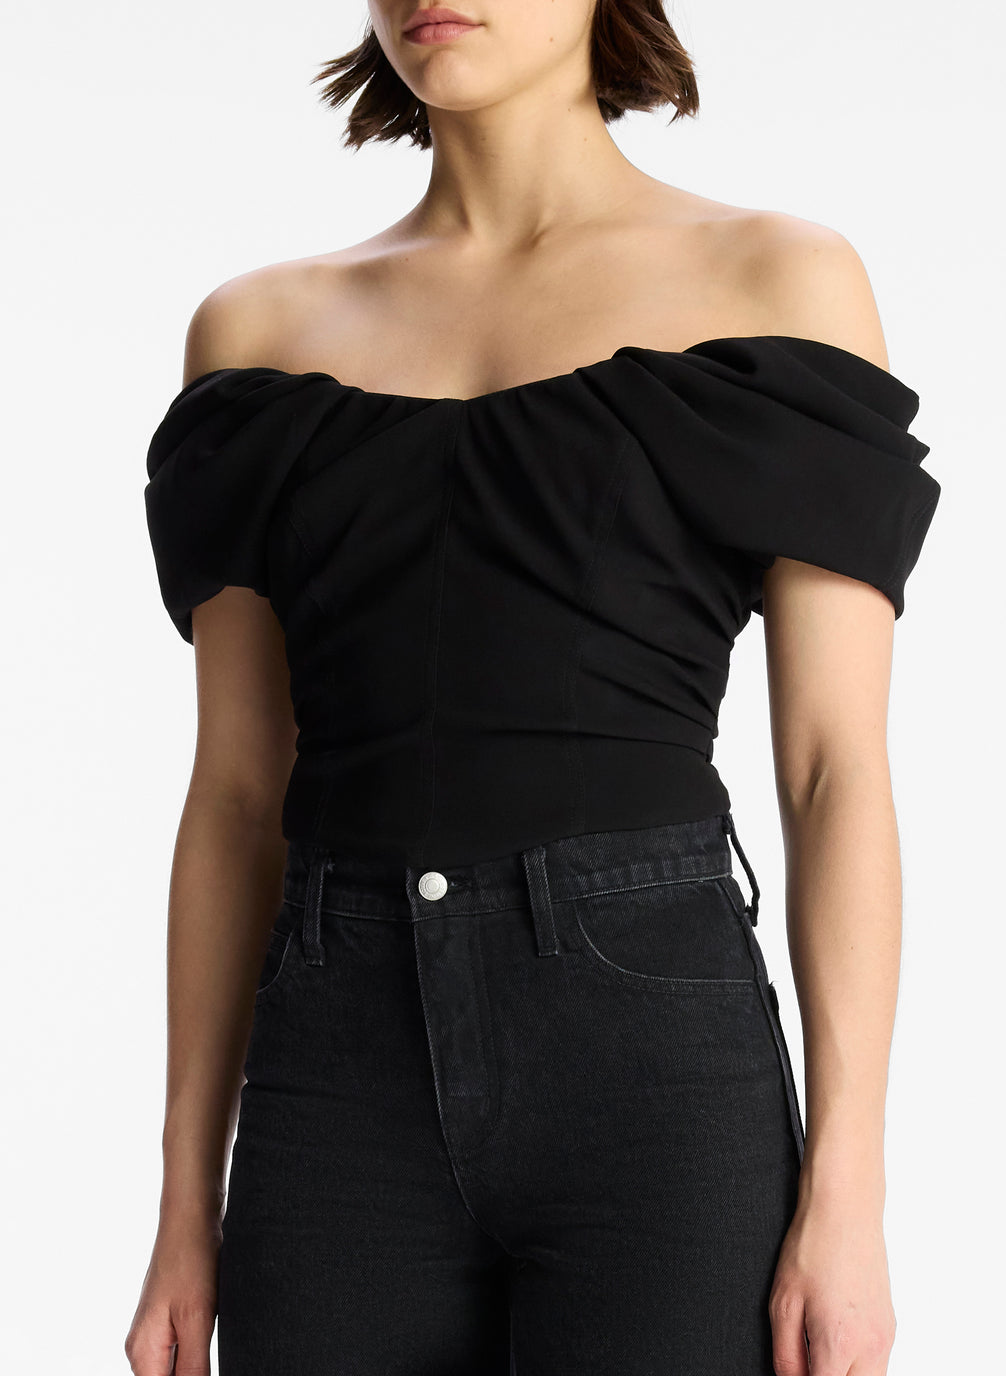 detail view of woman wearing black off shoulder puff sleeve top and dark wash denim jeans